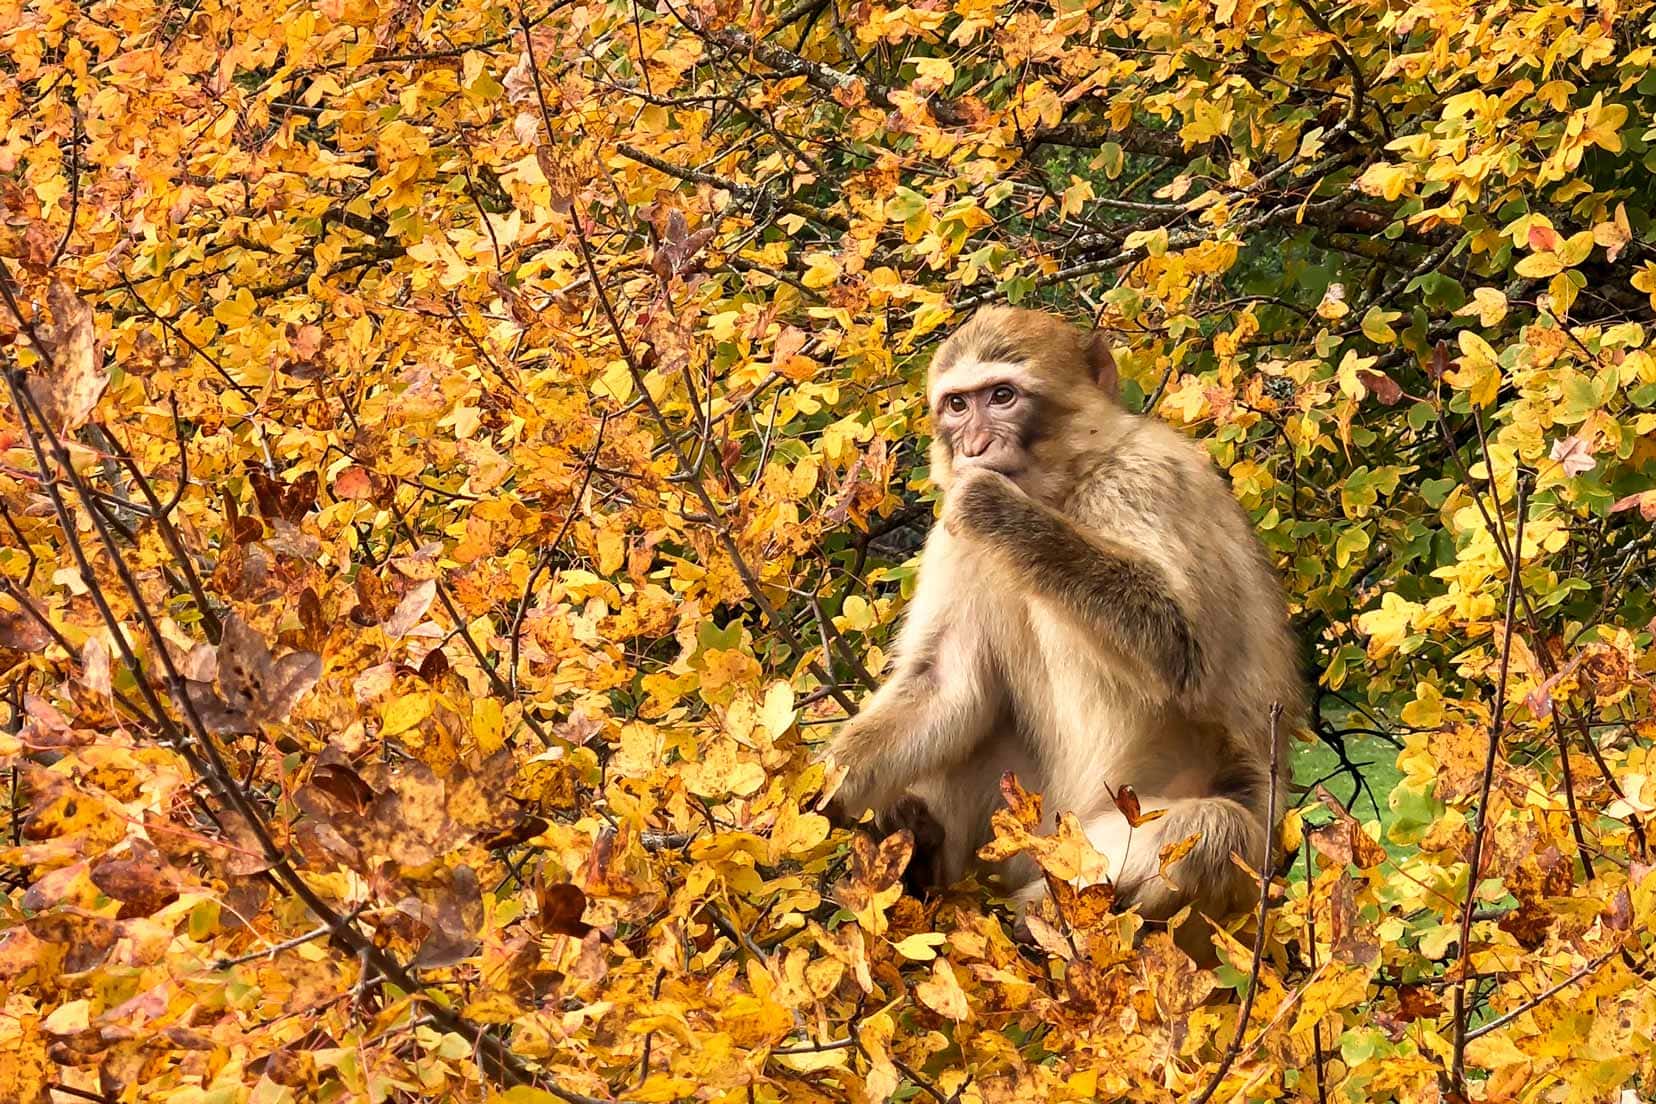 monkey-in-autumn-tree at rocamadour monkey forest